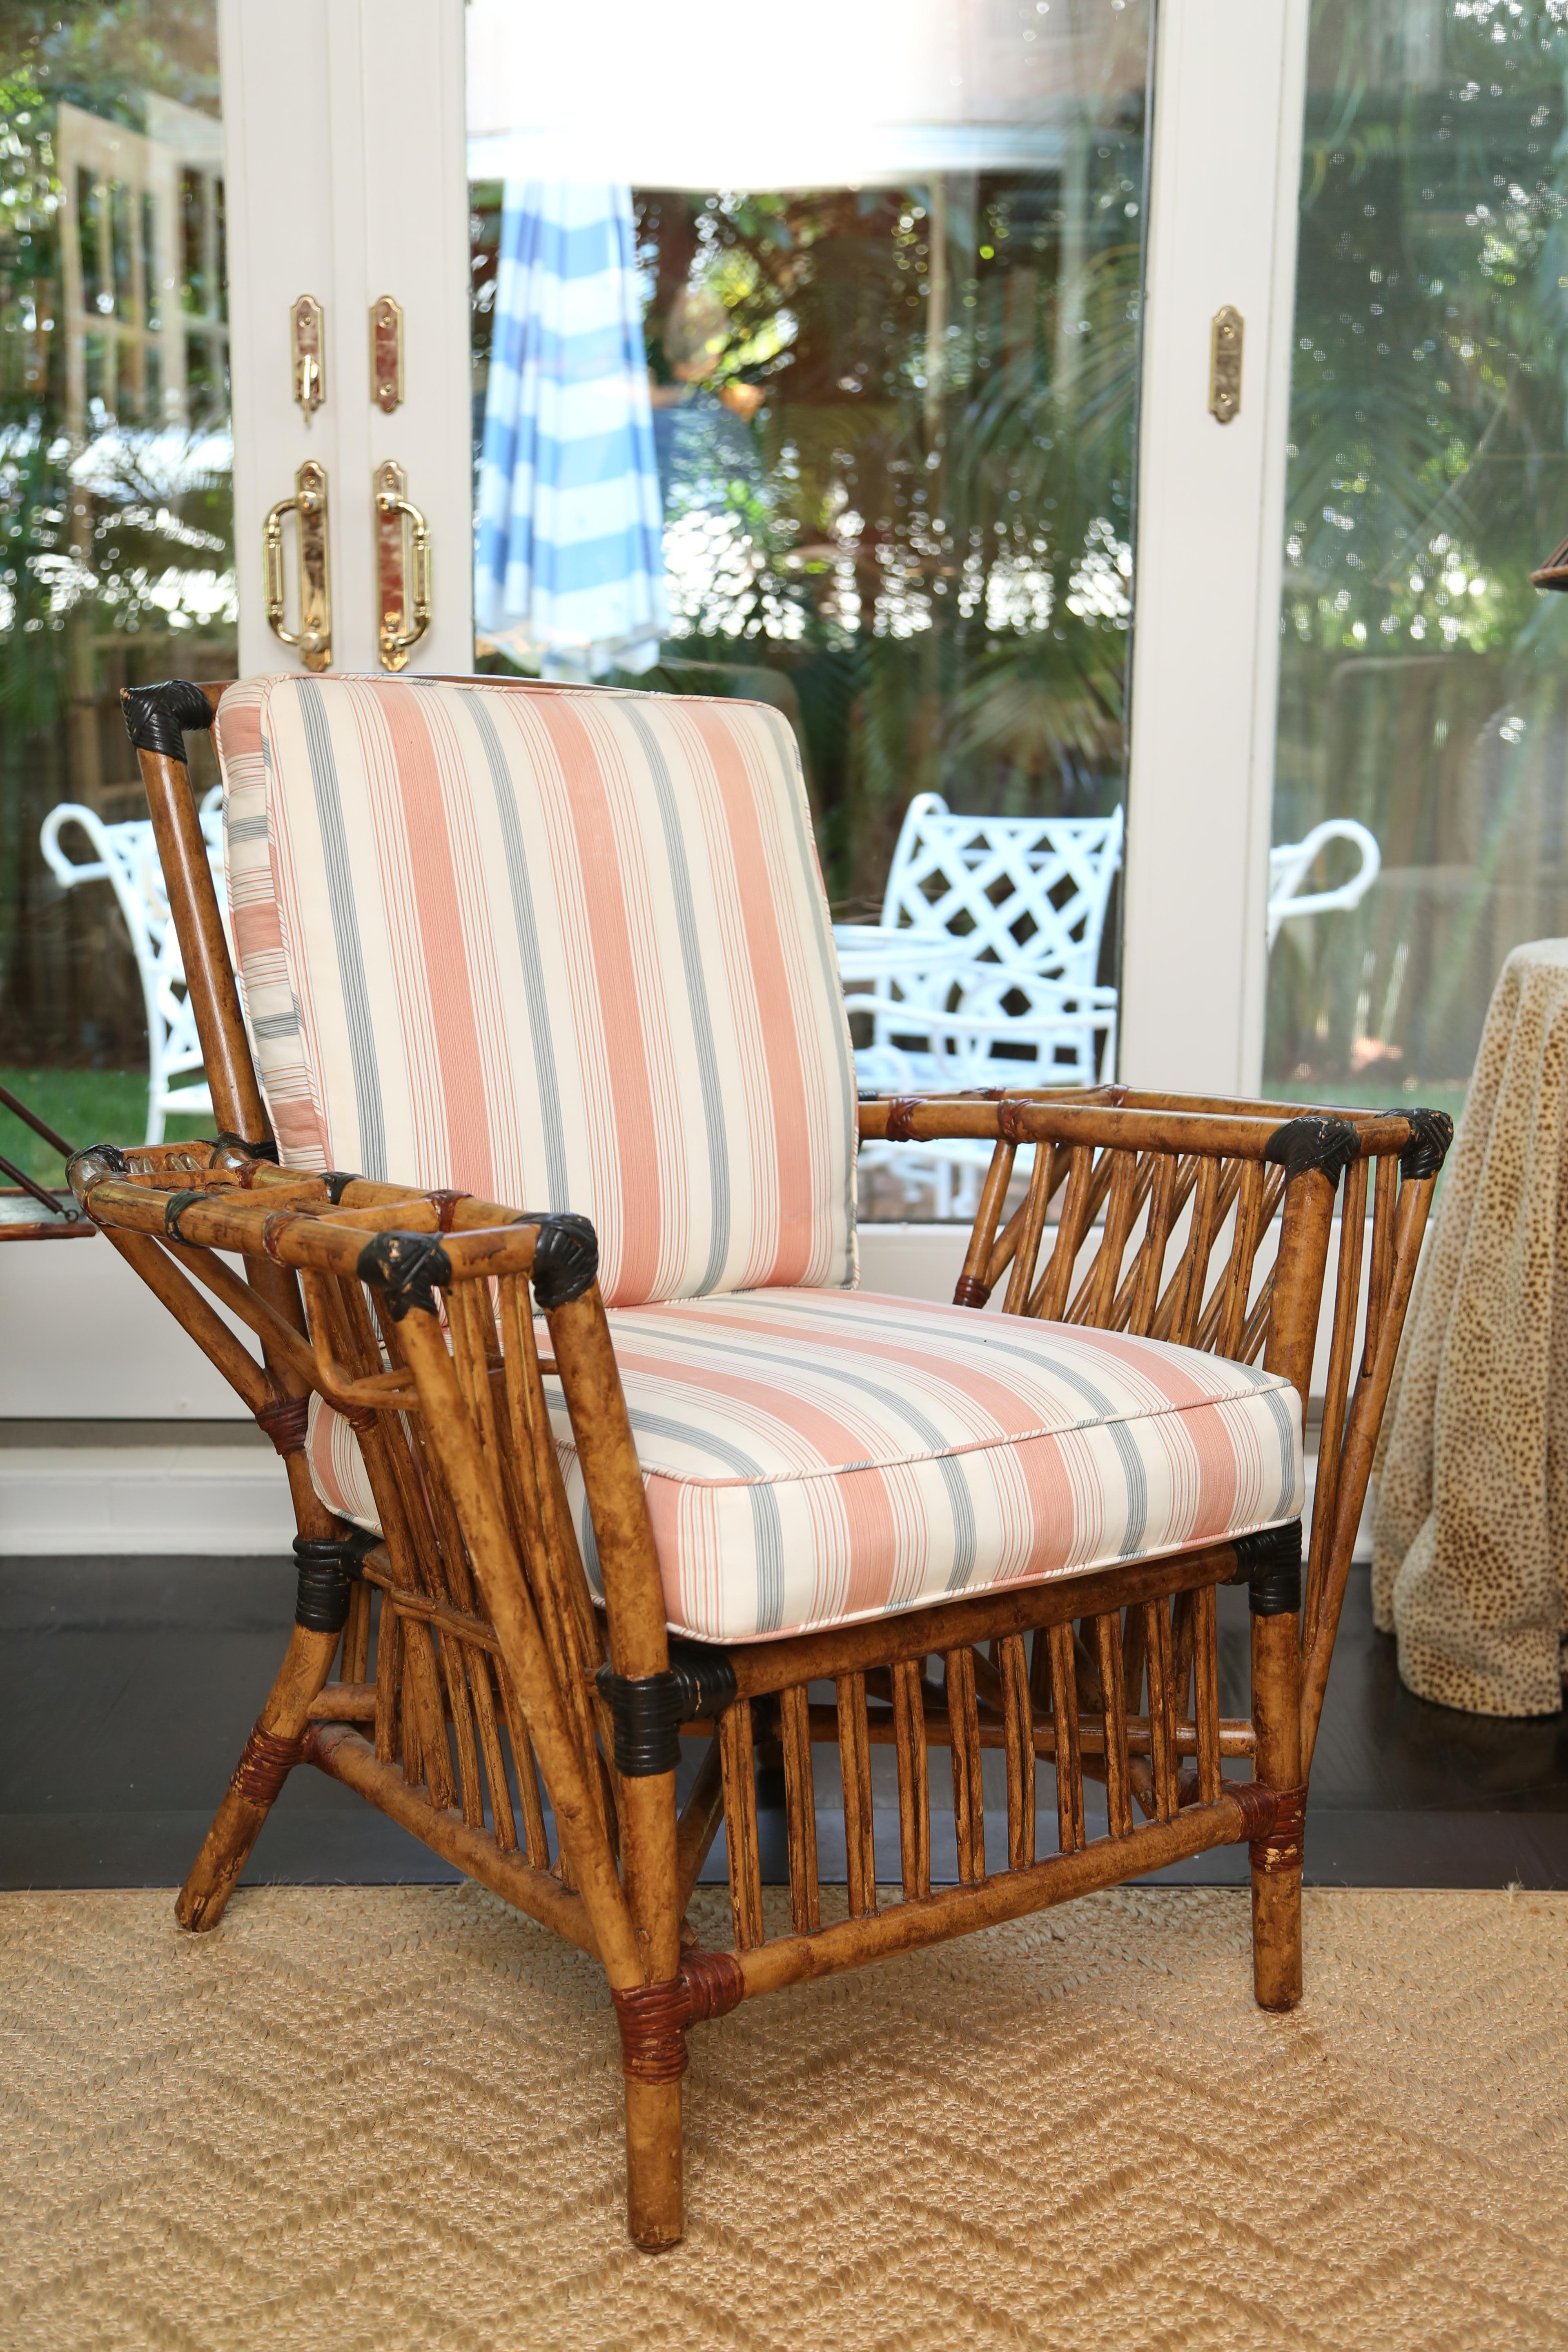 Pair of Classic president chairs with room or your favourite magazine and dockail on either side. Lovely woven details on either side. Fabric is now a Classic light blue and coral stripe.